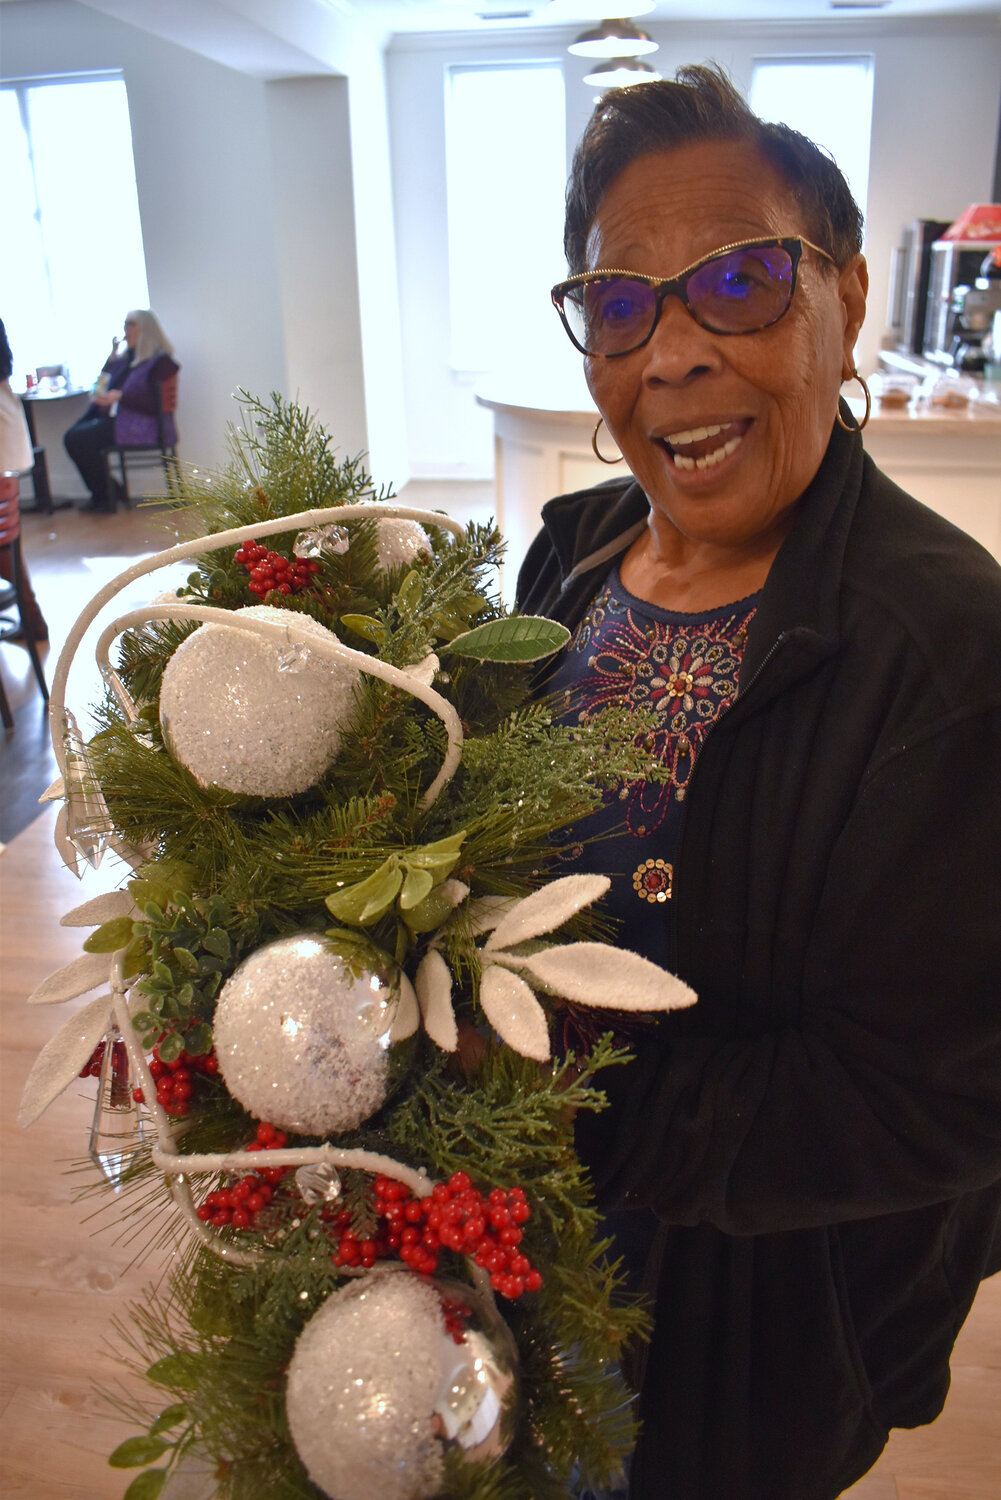 Brenda Hayward decided to attend on a whim, and she won the door prize she liked at Thrive Dorchester 2023, hosted by the Dorchester Banner at the Weinberg Intergenerational Center.